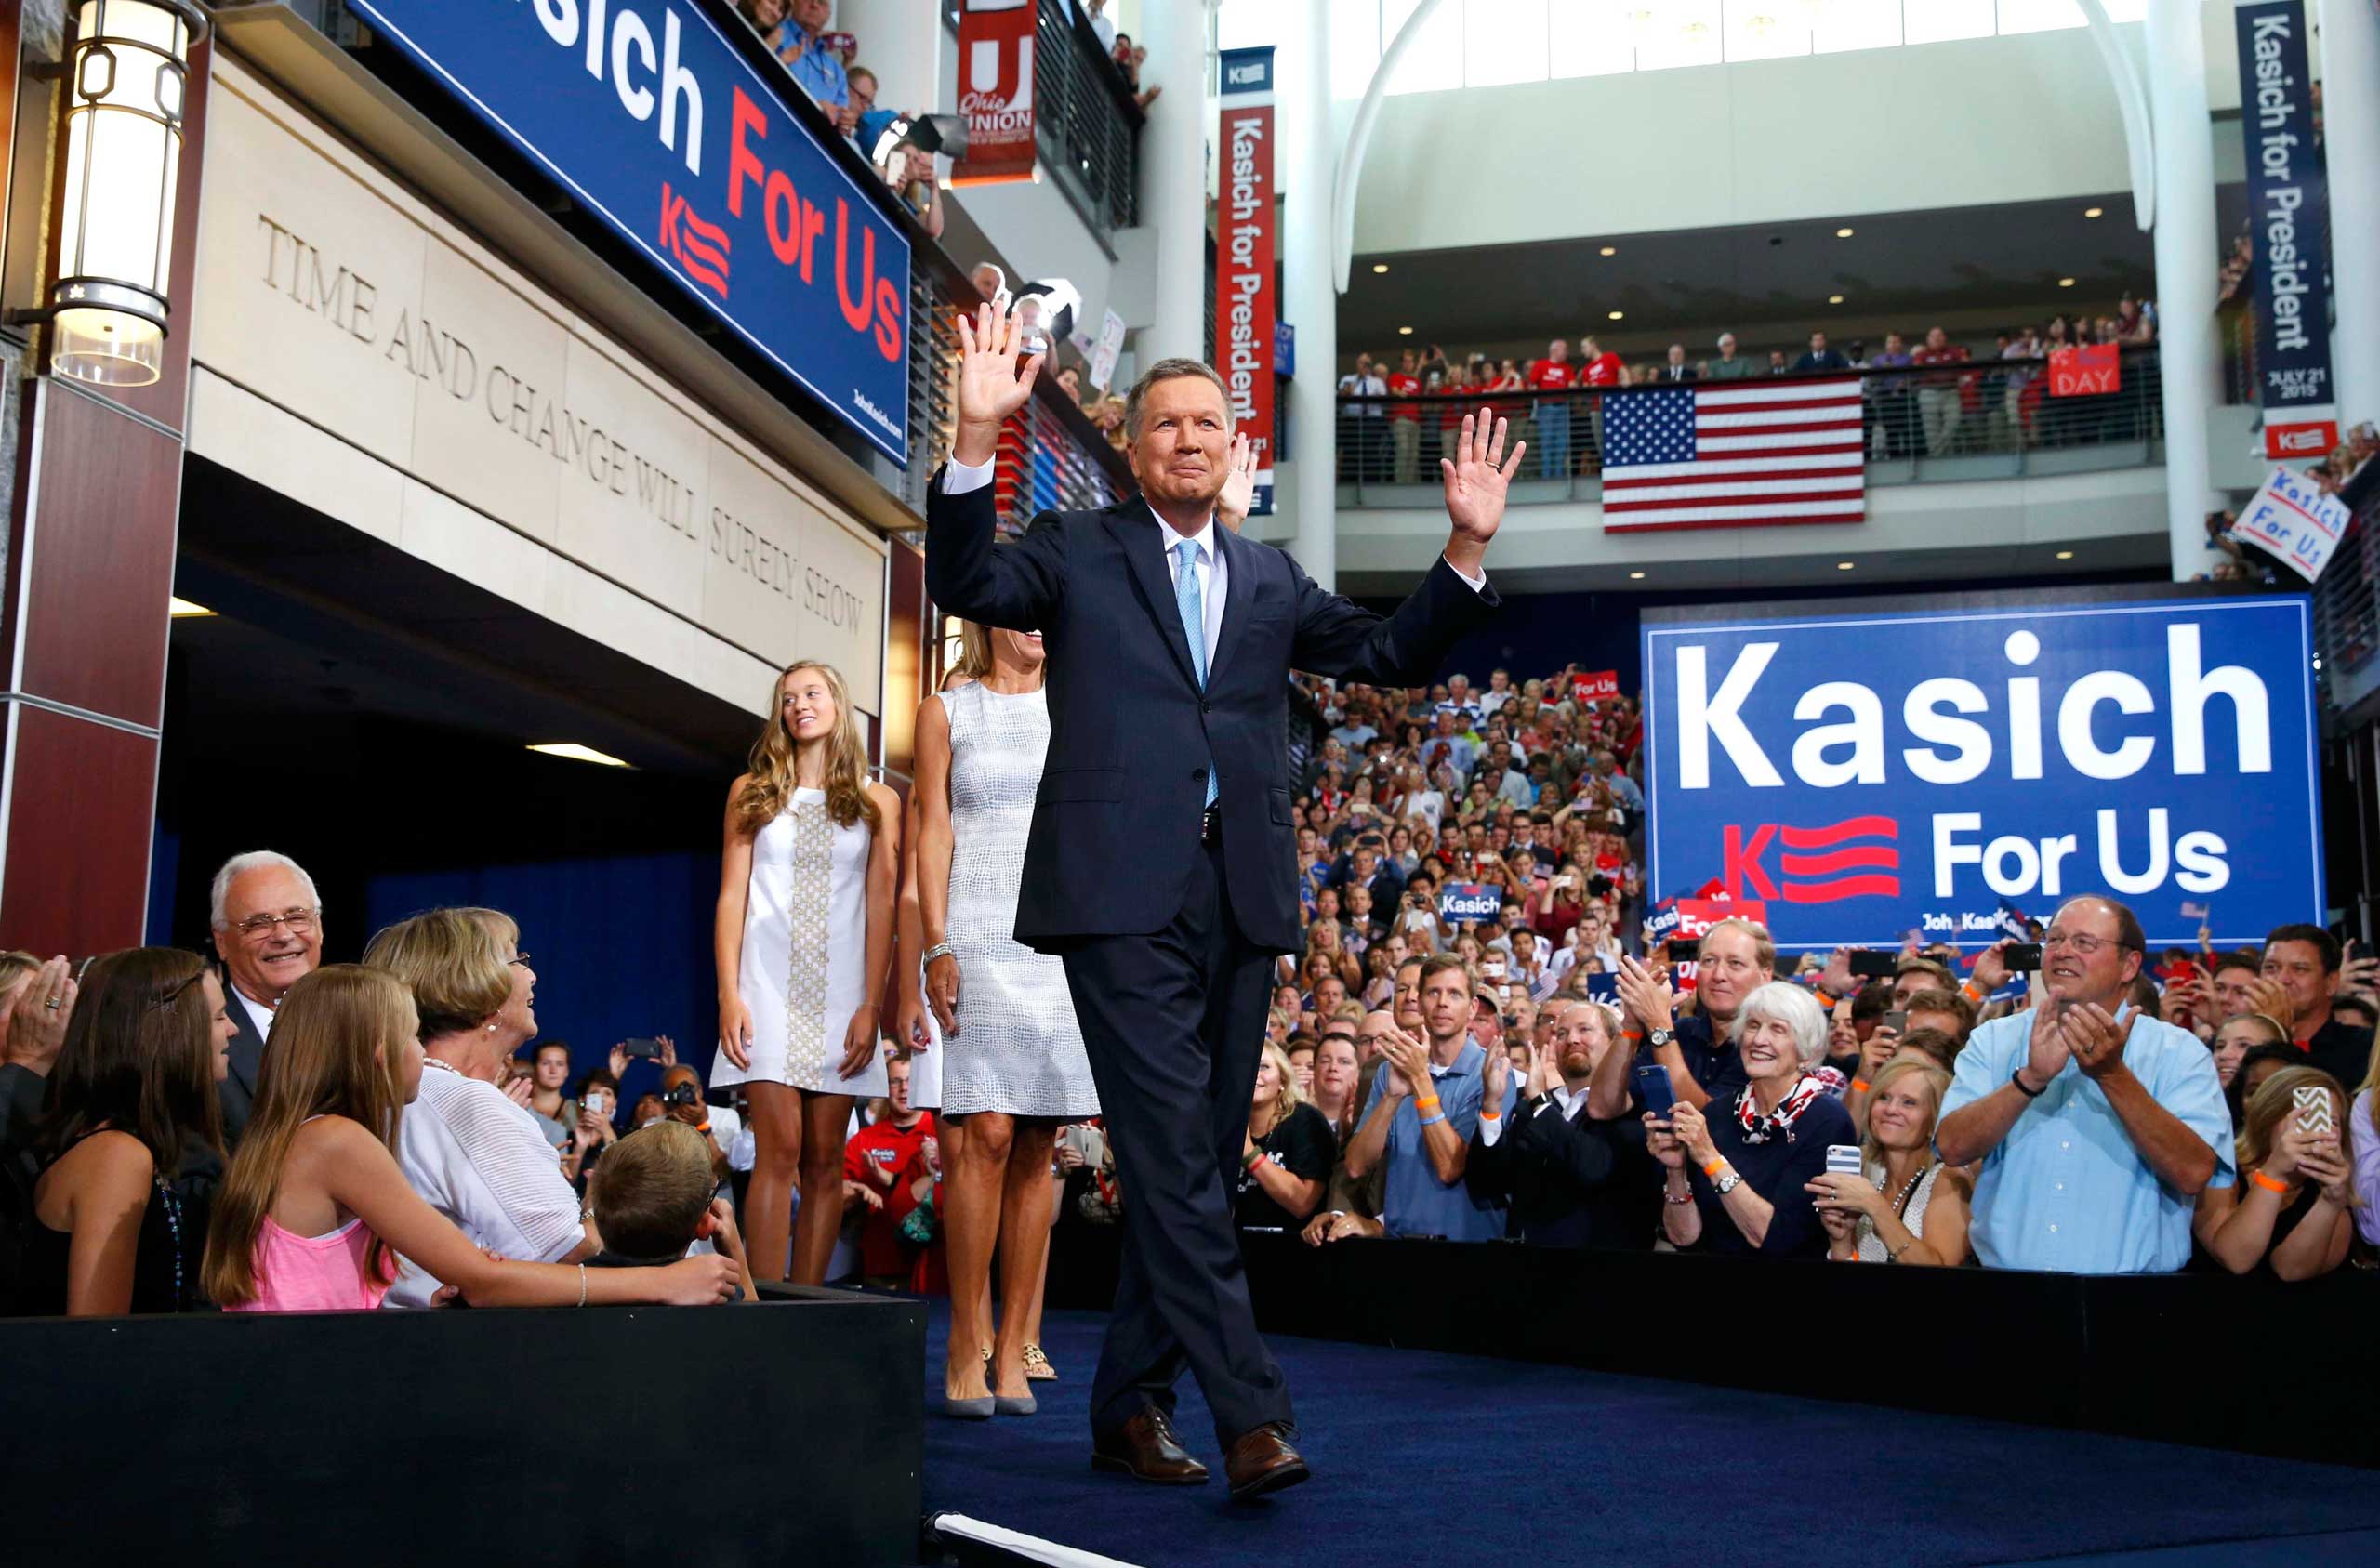 Ohio Governor John Kasich arrives on stage to formally announce his campaign for the 2016 Republican presidential nomination during a kickoff rally in Columbus, Ohio on July 21, 2015.